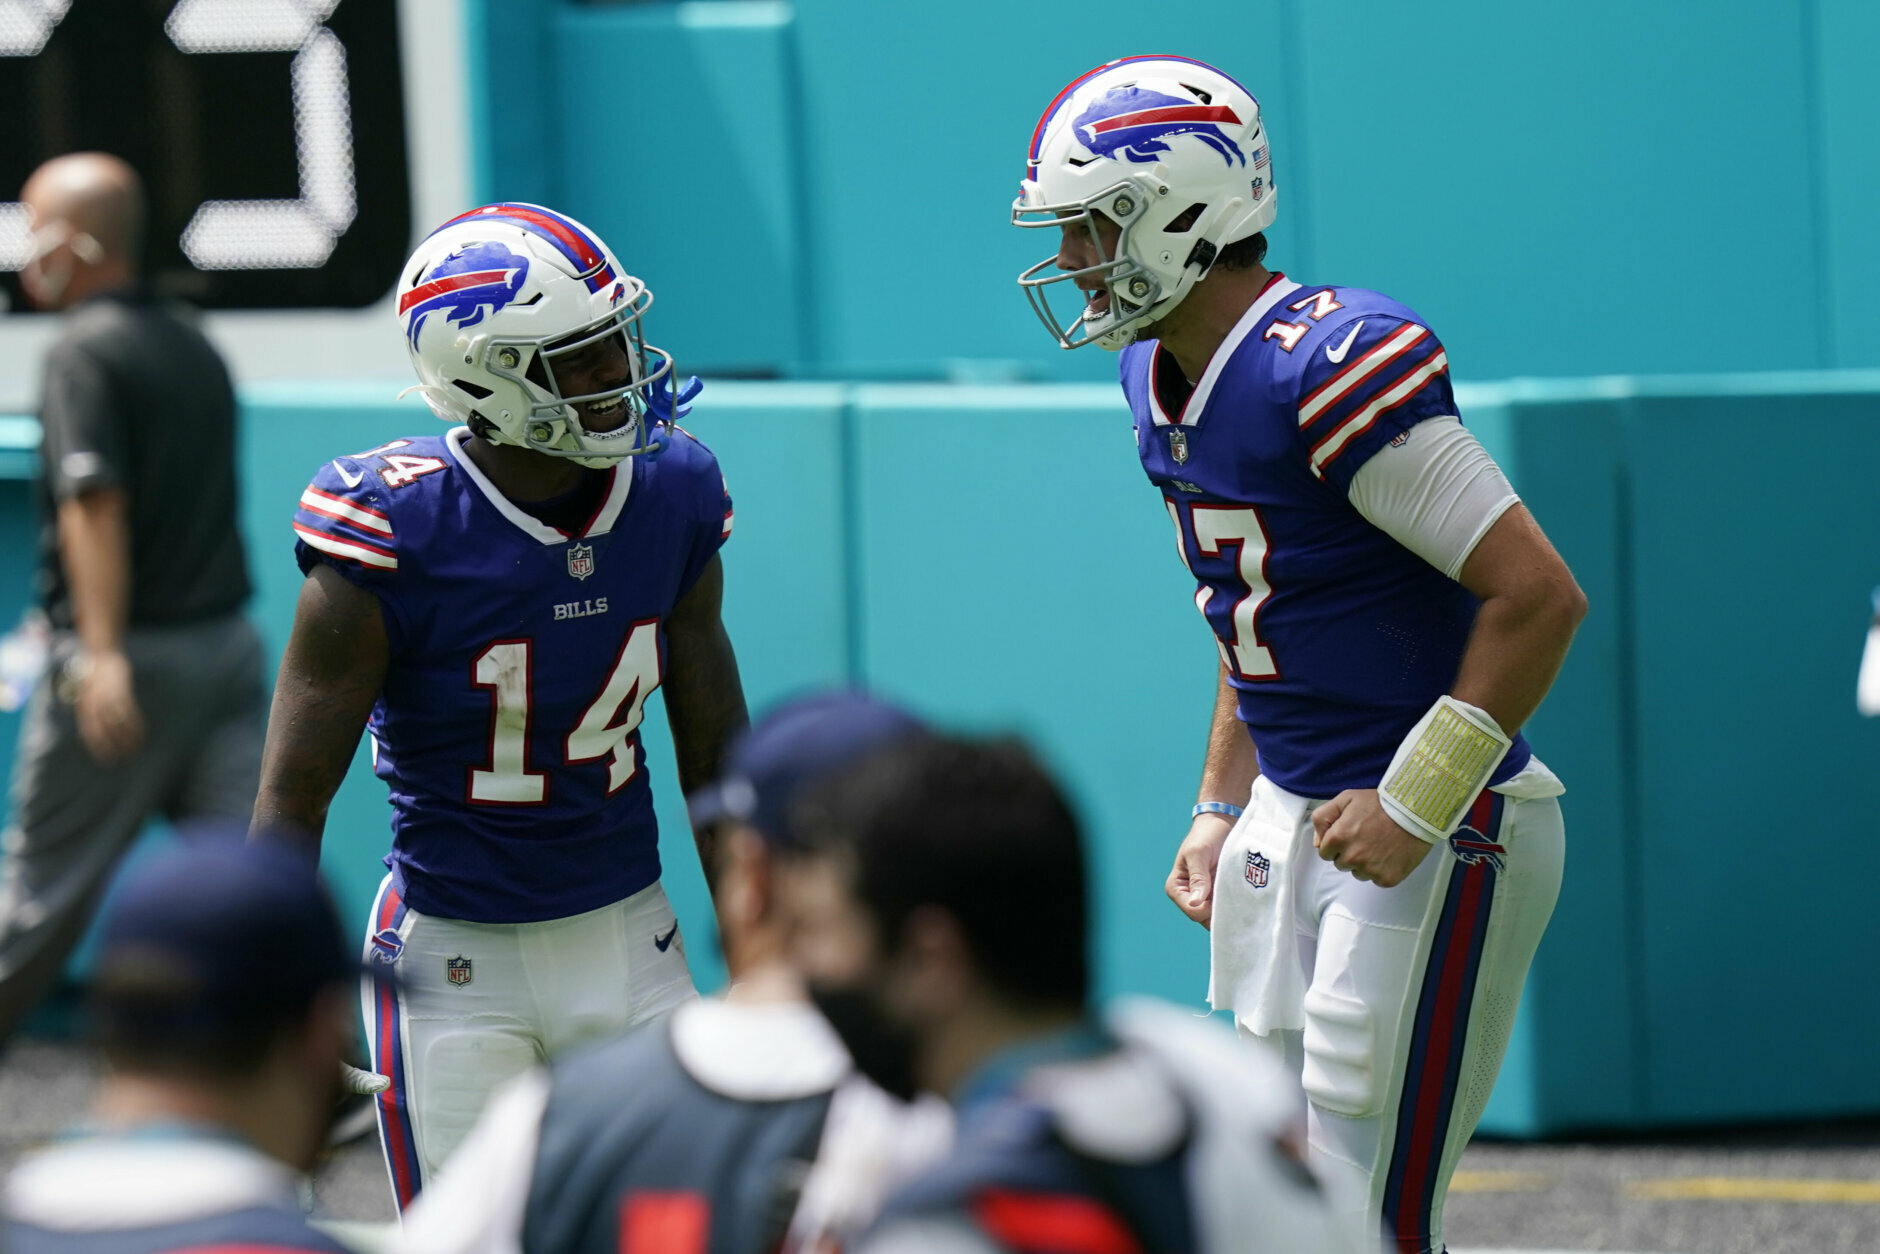 <p><b><i>Bills 31</i></b><br />
<b><i>Dolphins 28</i></b></p>
<p>Josh Allen set career highs with 417 yards and four touchdown passes. He became the first Buffalo quarterback to post consecutive 300-yard passing games since Drew Bledsoe in 2002. If Allen can post another big game against Aaron Donald next week &#8212; and get the ball to Stefon Diggs with Jalen Ramsey covering him &#8212; it might be time to get on the Bills bandwagon.</p>
